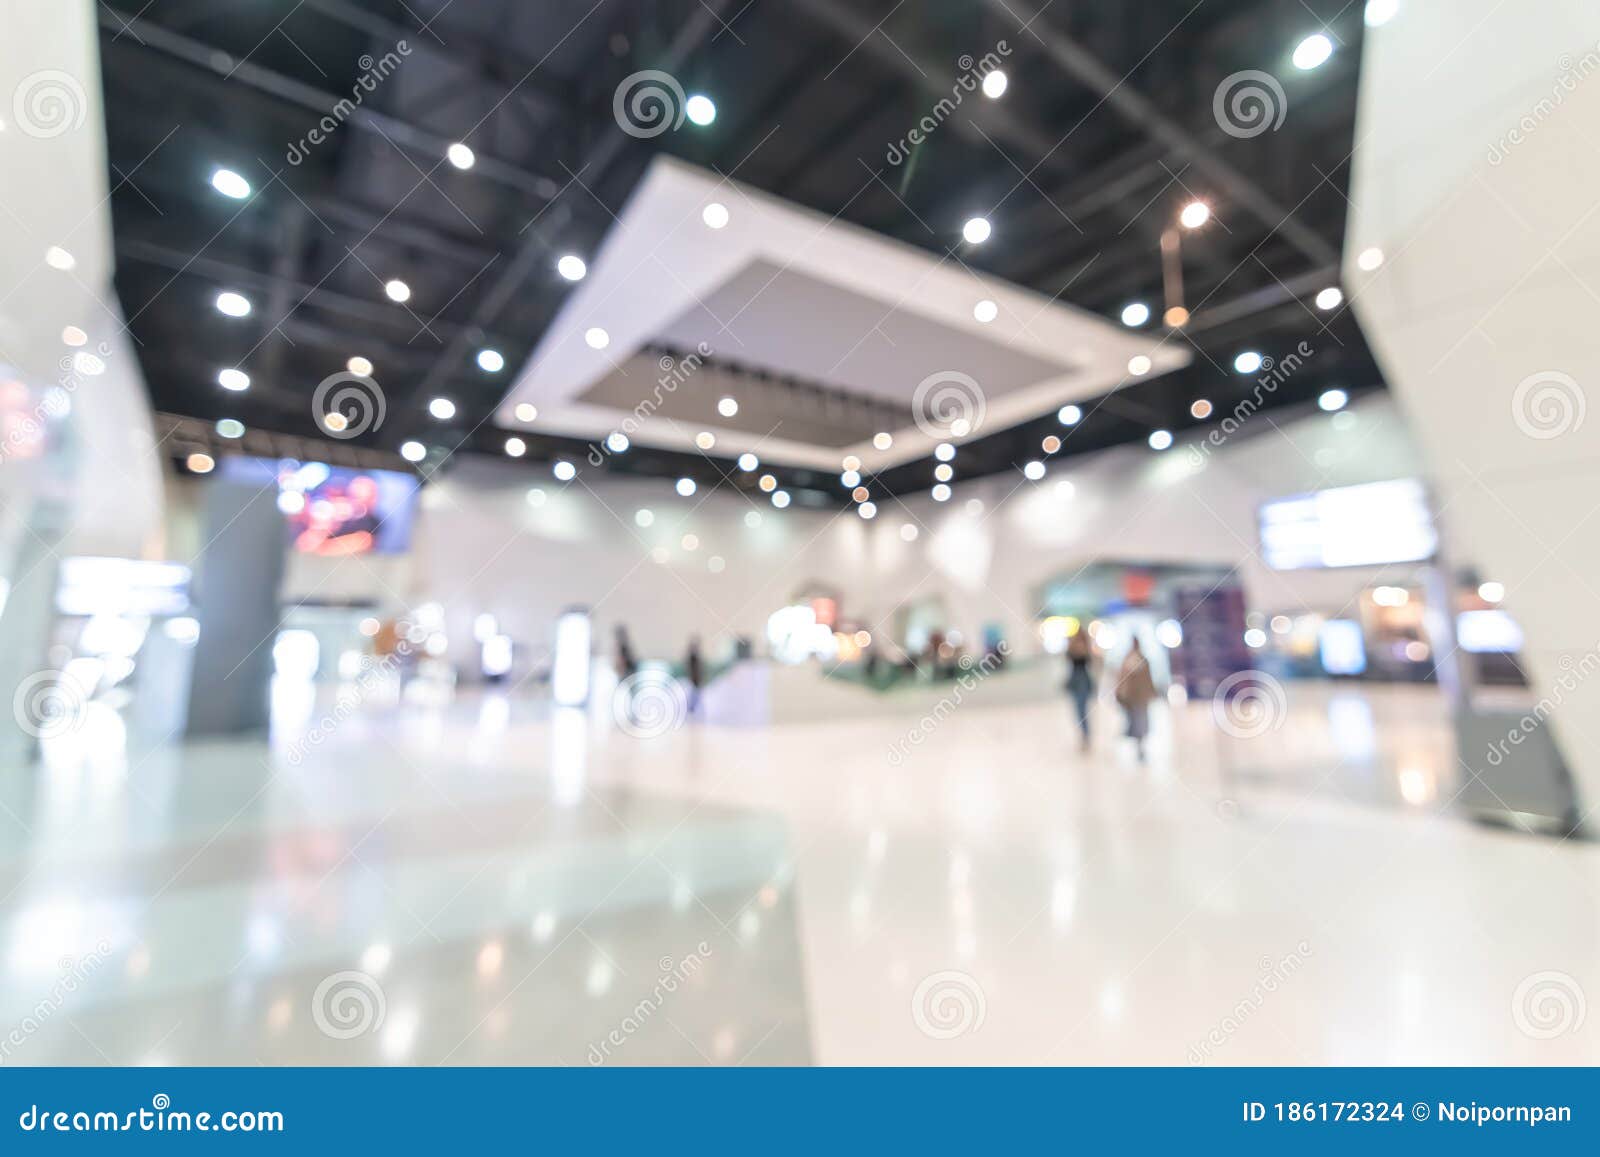 exhibition event hall blur background of trade show business, world or international expo showcase, tech fair